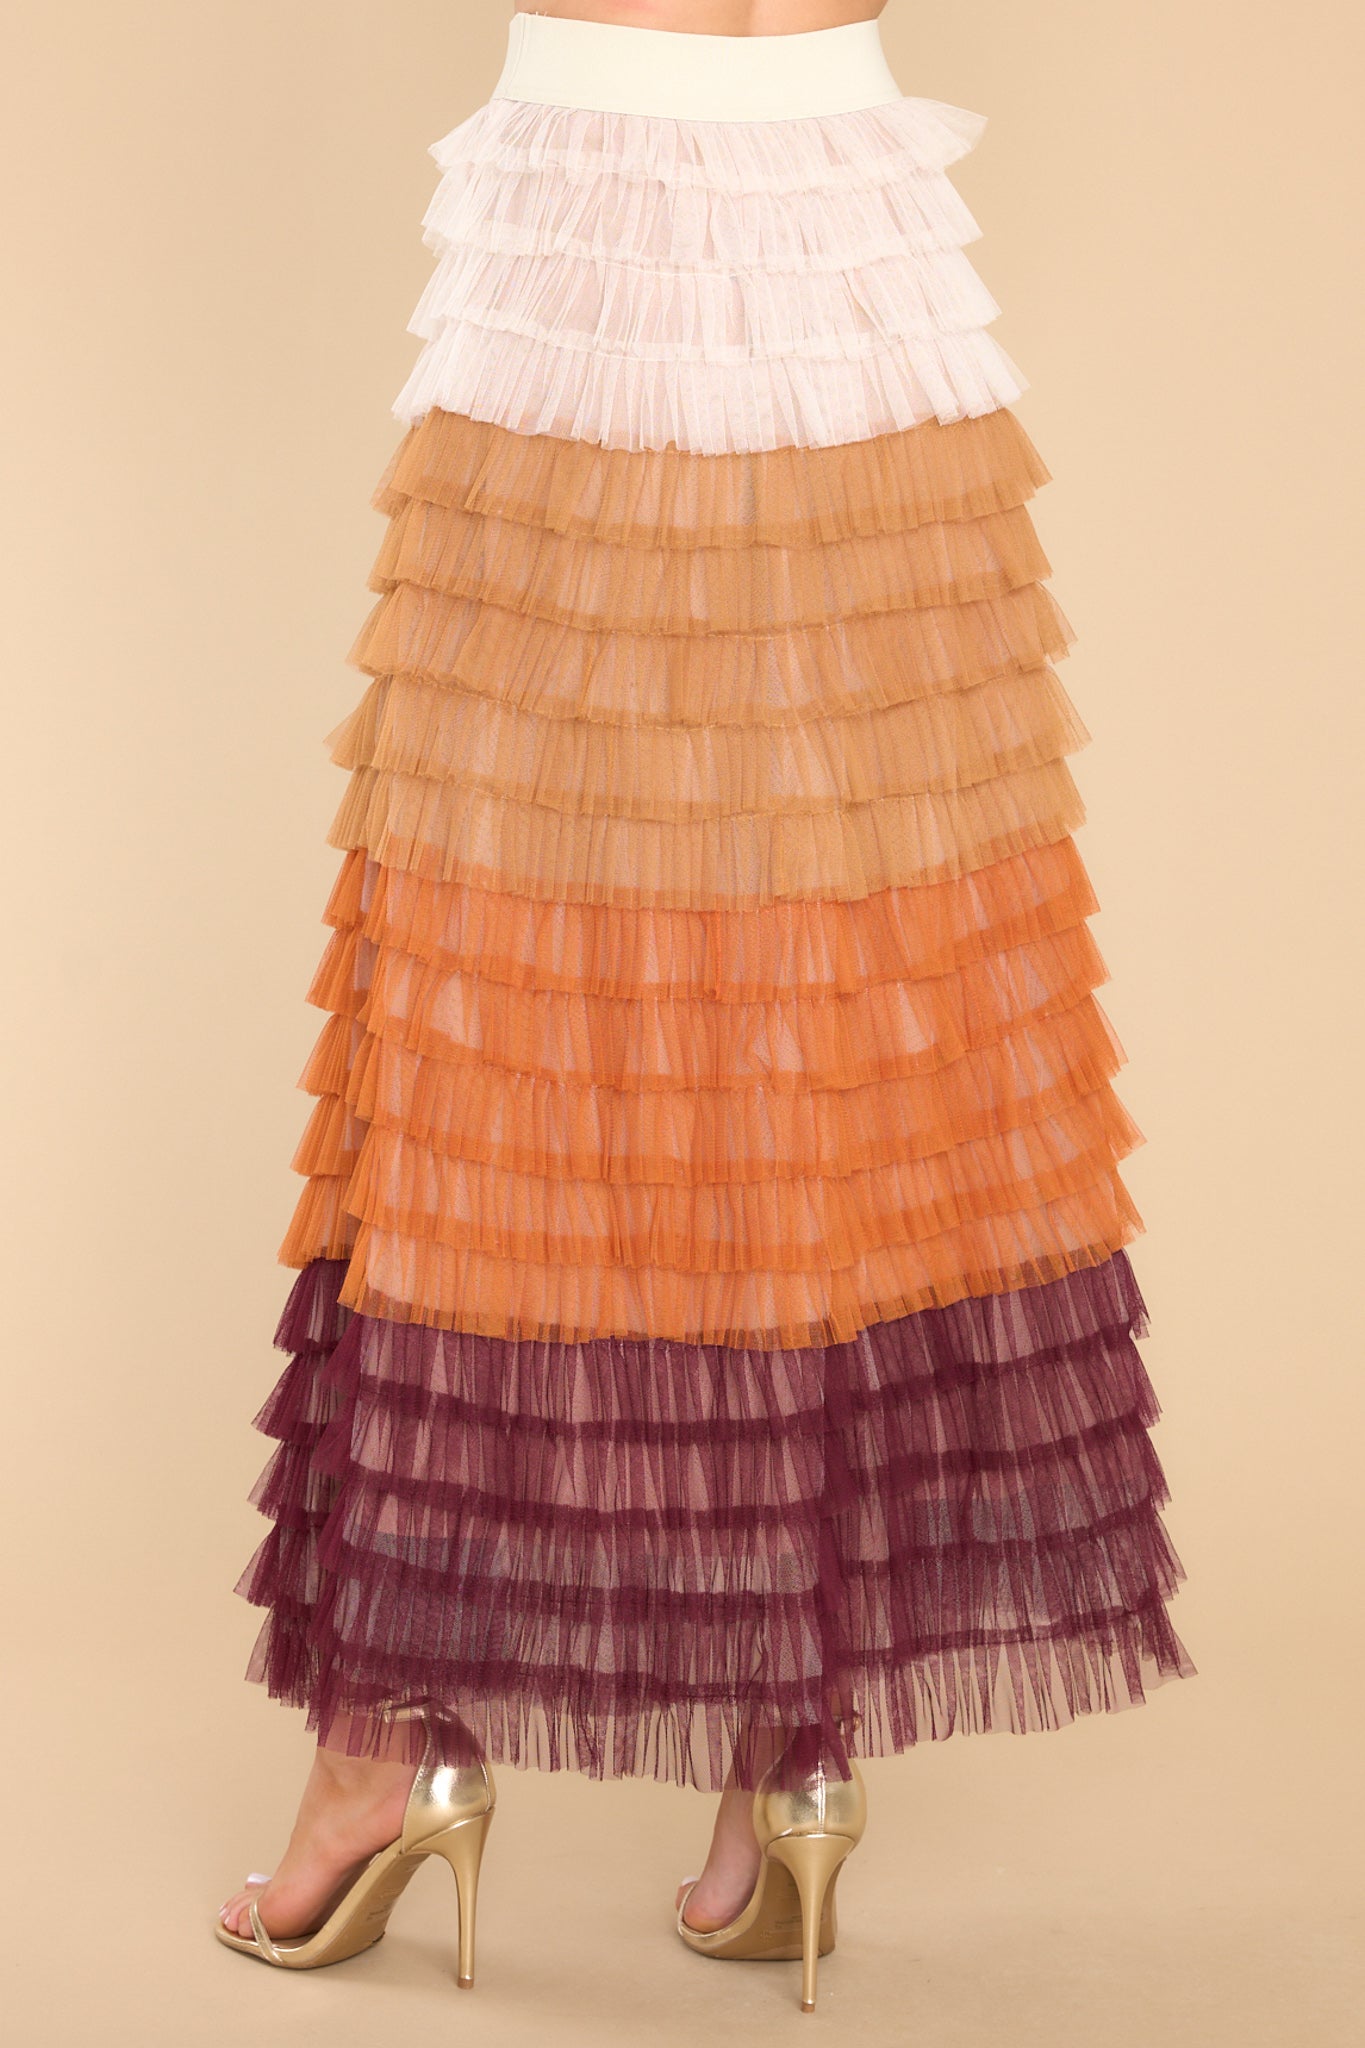 Back view of this skirt that features a high waist design, an elastic waistband and ruffle tulle detailing throughout.